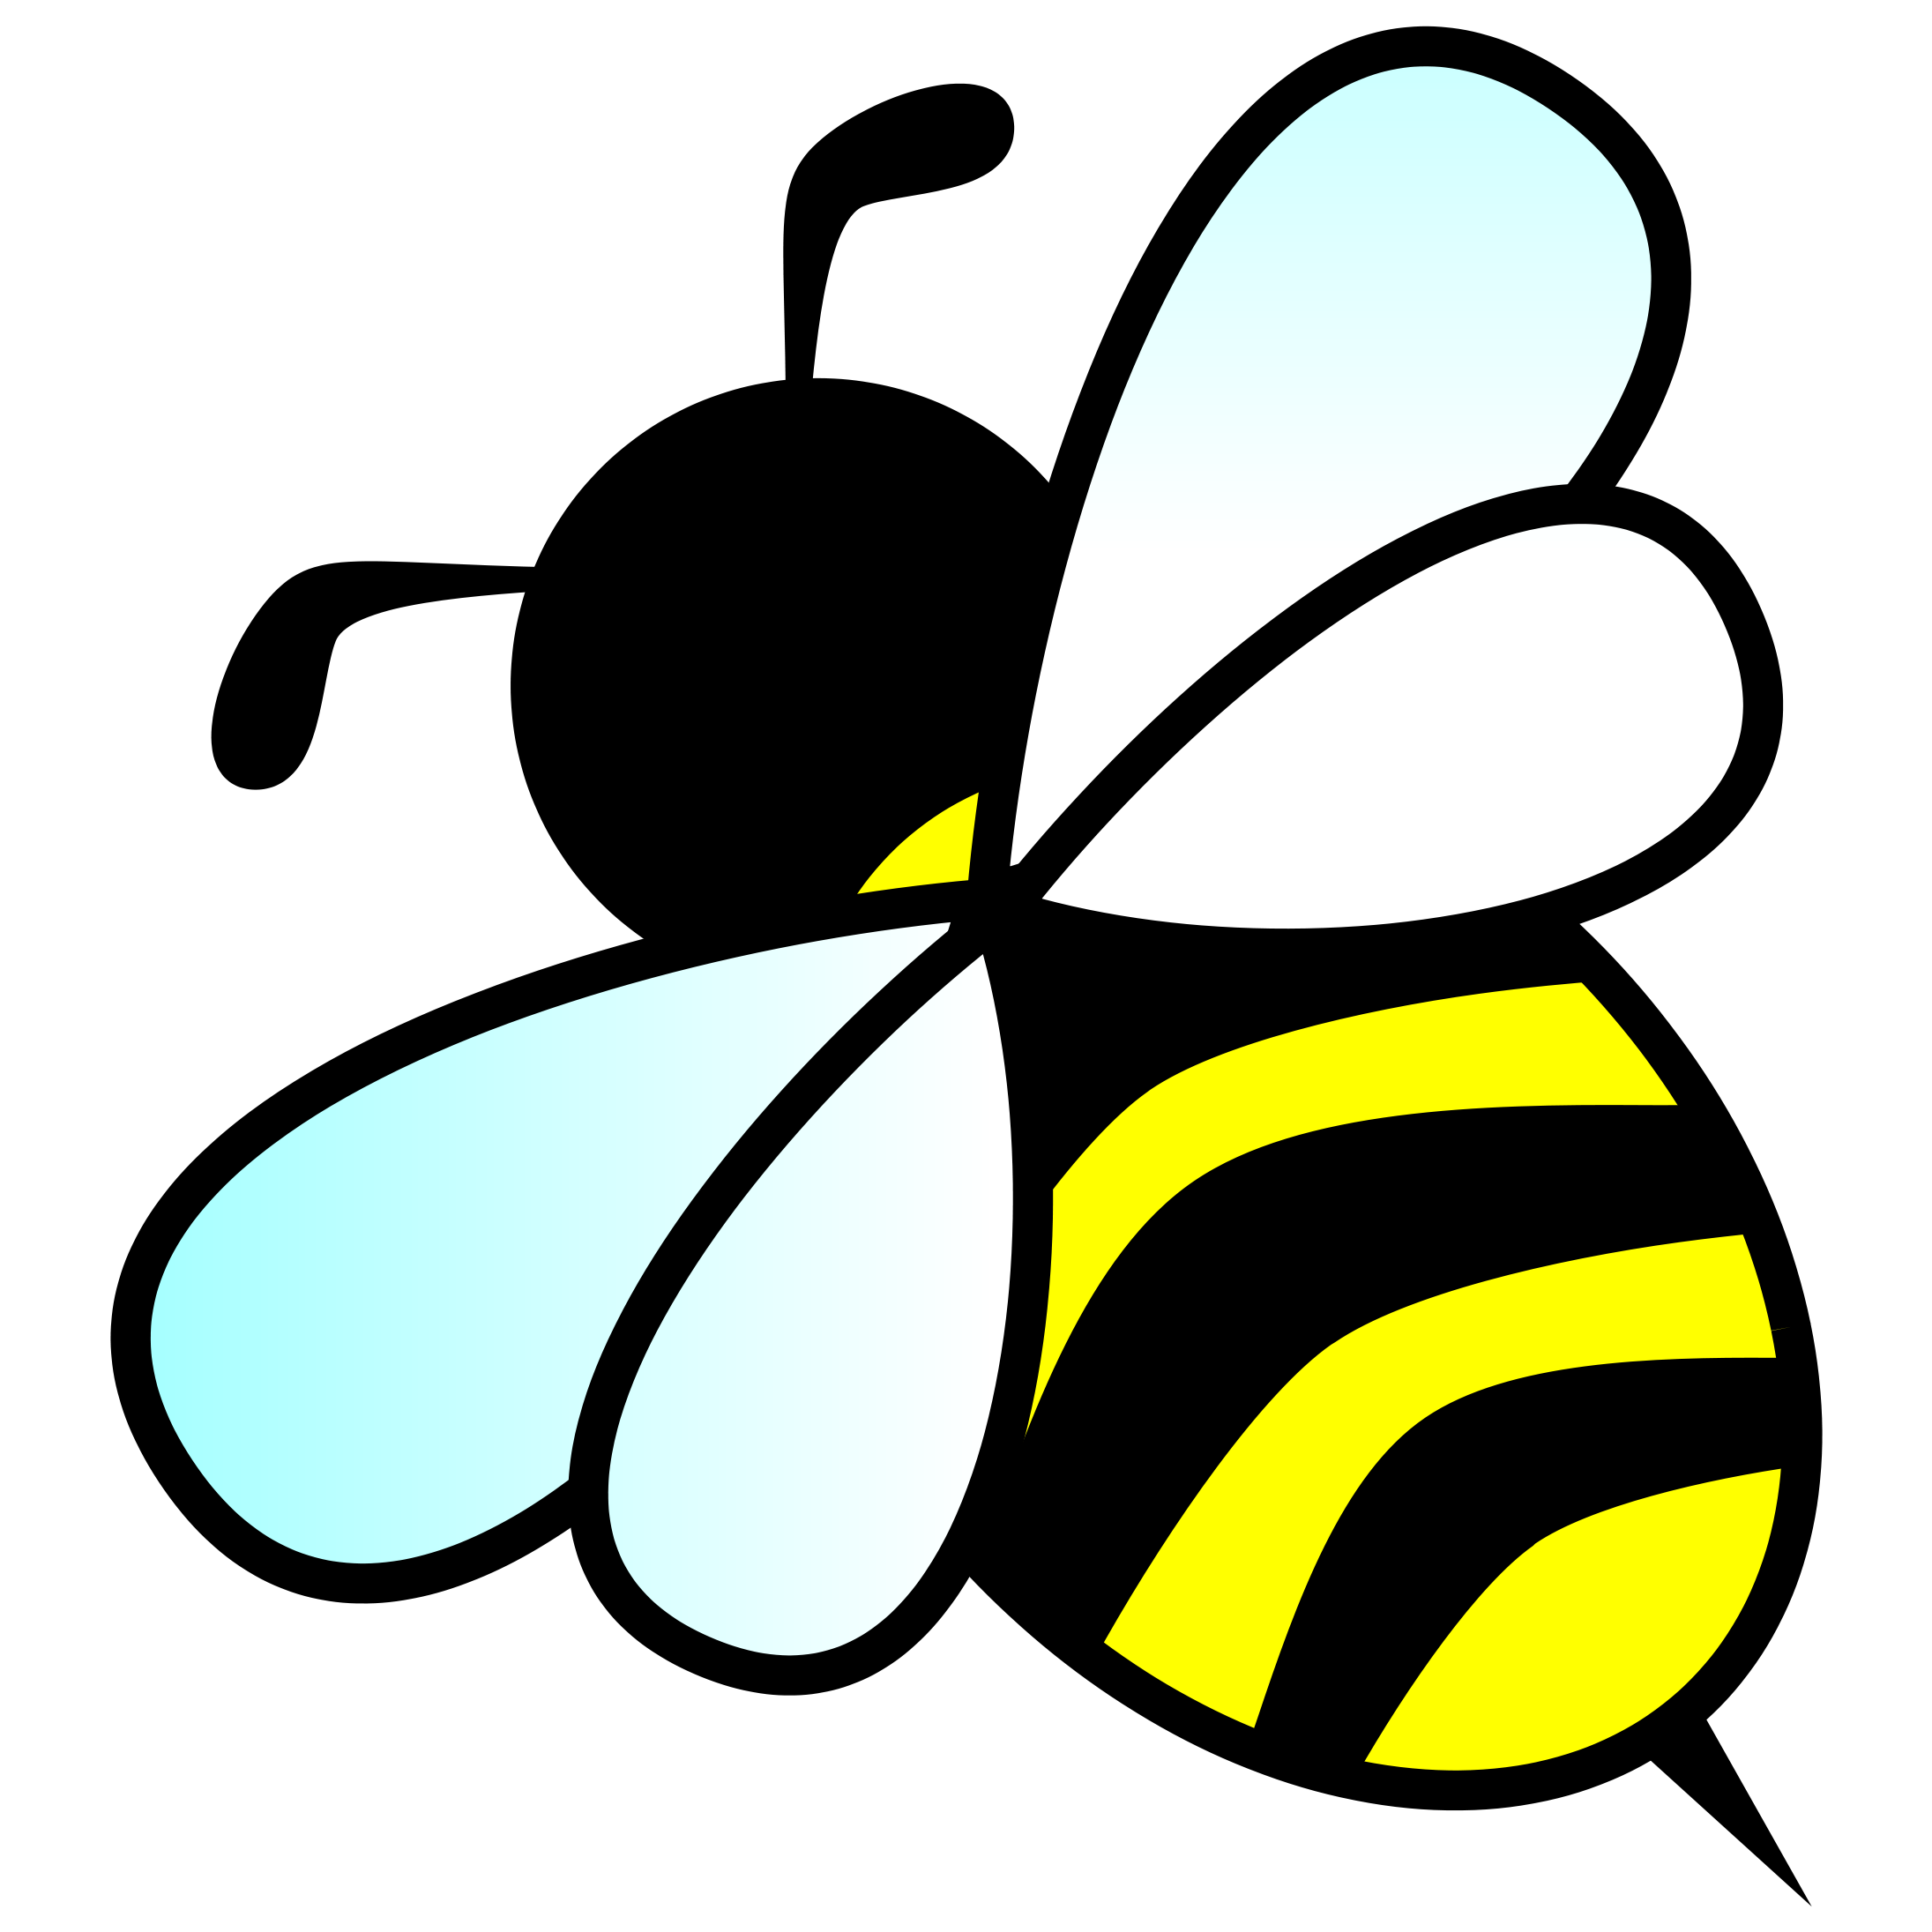 Bee clipart vector. Hd images for shoppe